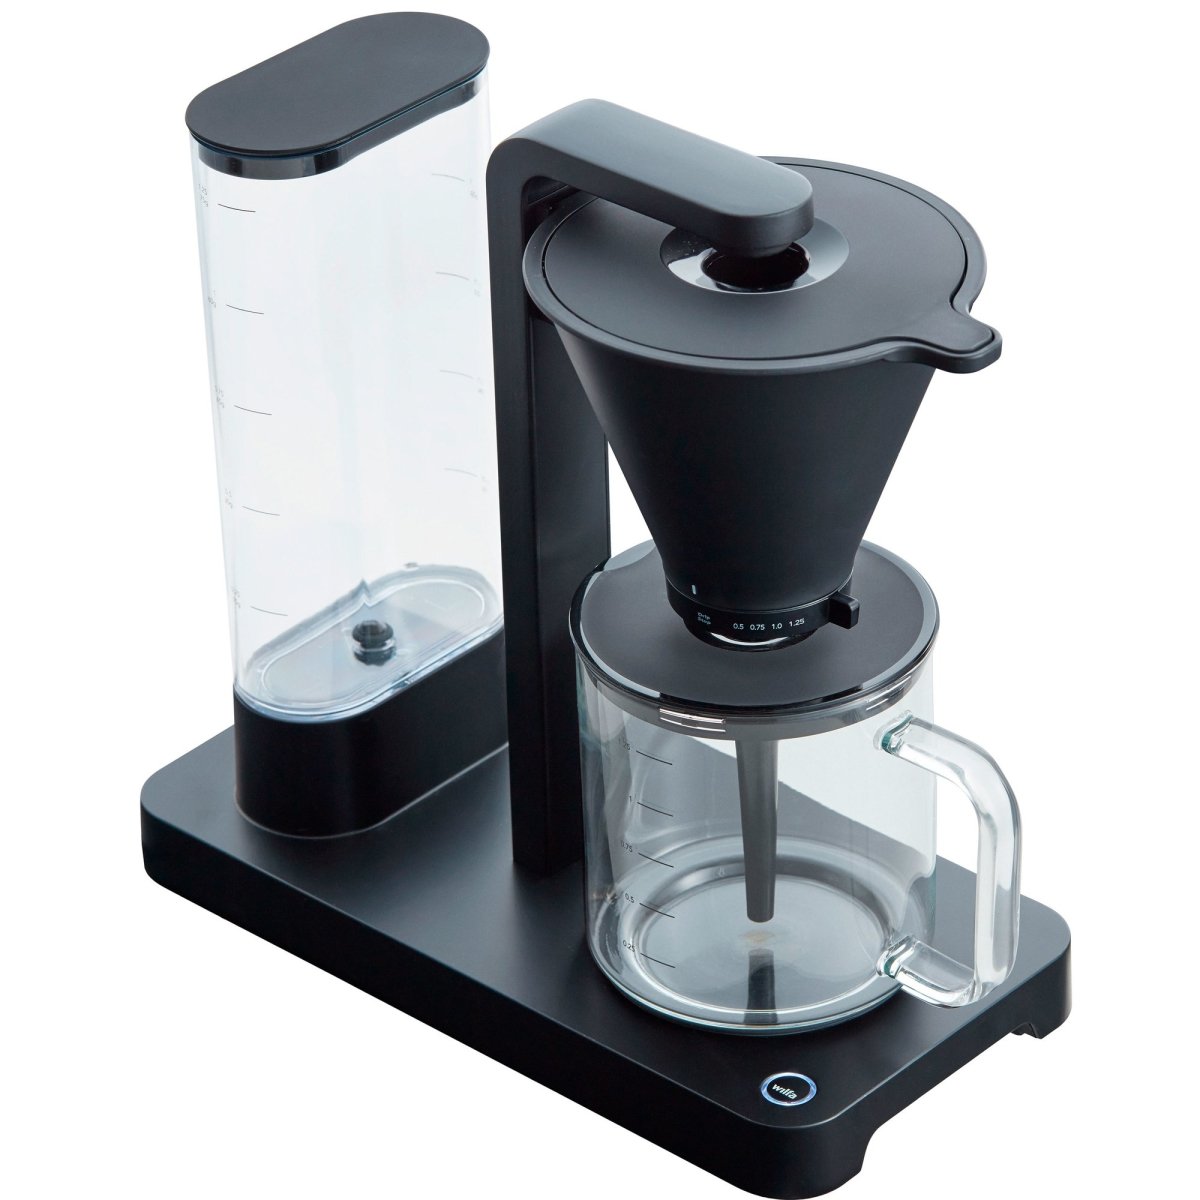 Wilfa WSP-1A Precision Automatic Coffee Brewer - Aluminum for sale online